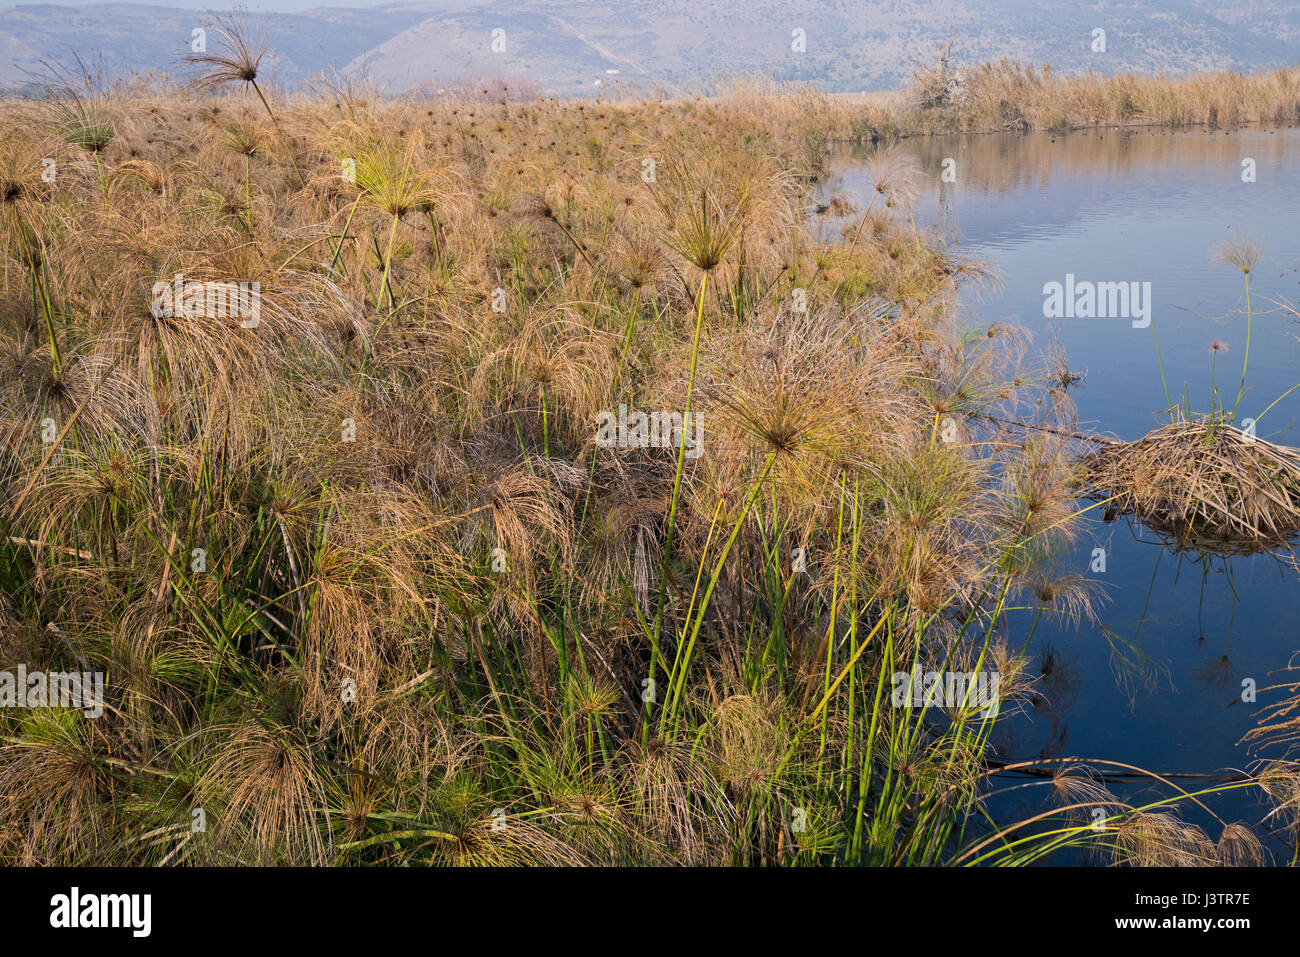 Papyrus Swamp in the Hula Nature Reserve, Hula Valley, Northern Israel, January Stock Photo